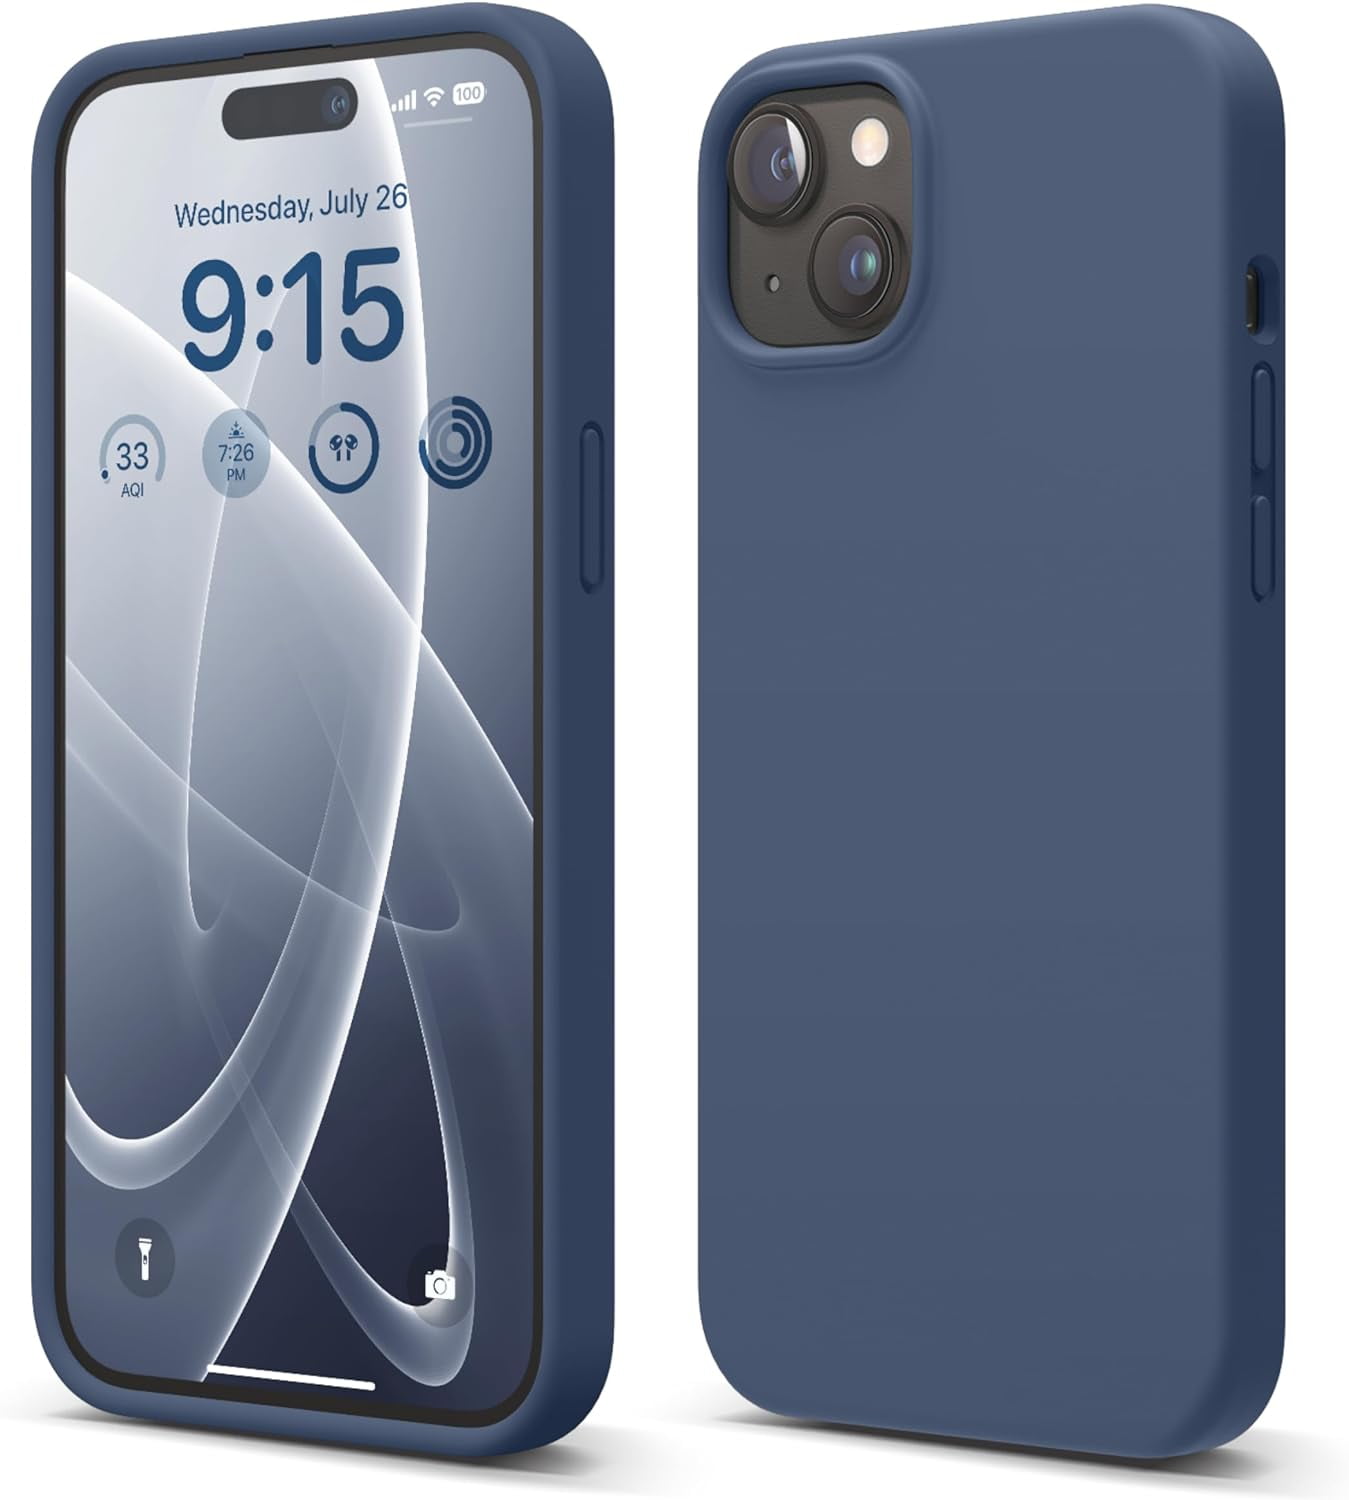  elago Compatible with iPhone 15 Pro Max Case, Liquid Silicone  Case, Full Body Protective Cover, Shockproof, Slim Phone Case, Anti-Scratch  Soft Microfiber Lining, 6.7 inch (Stone) : Cell Phones & Accessories